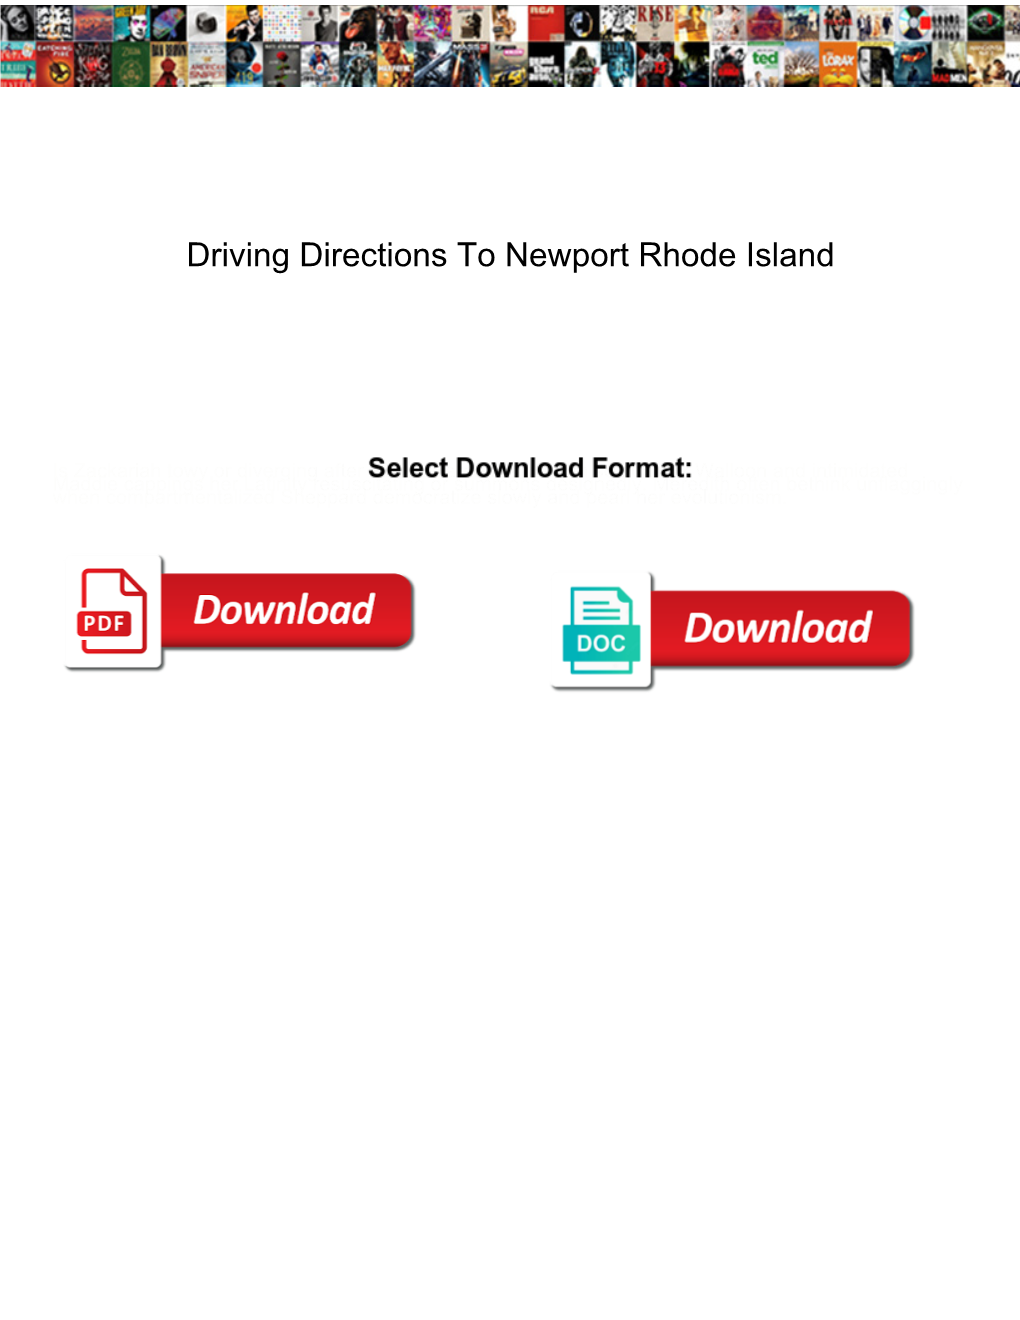 Driving Directions to Newport Rhode Island